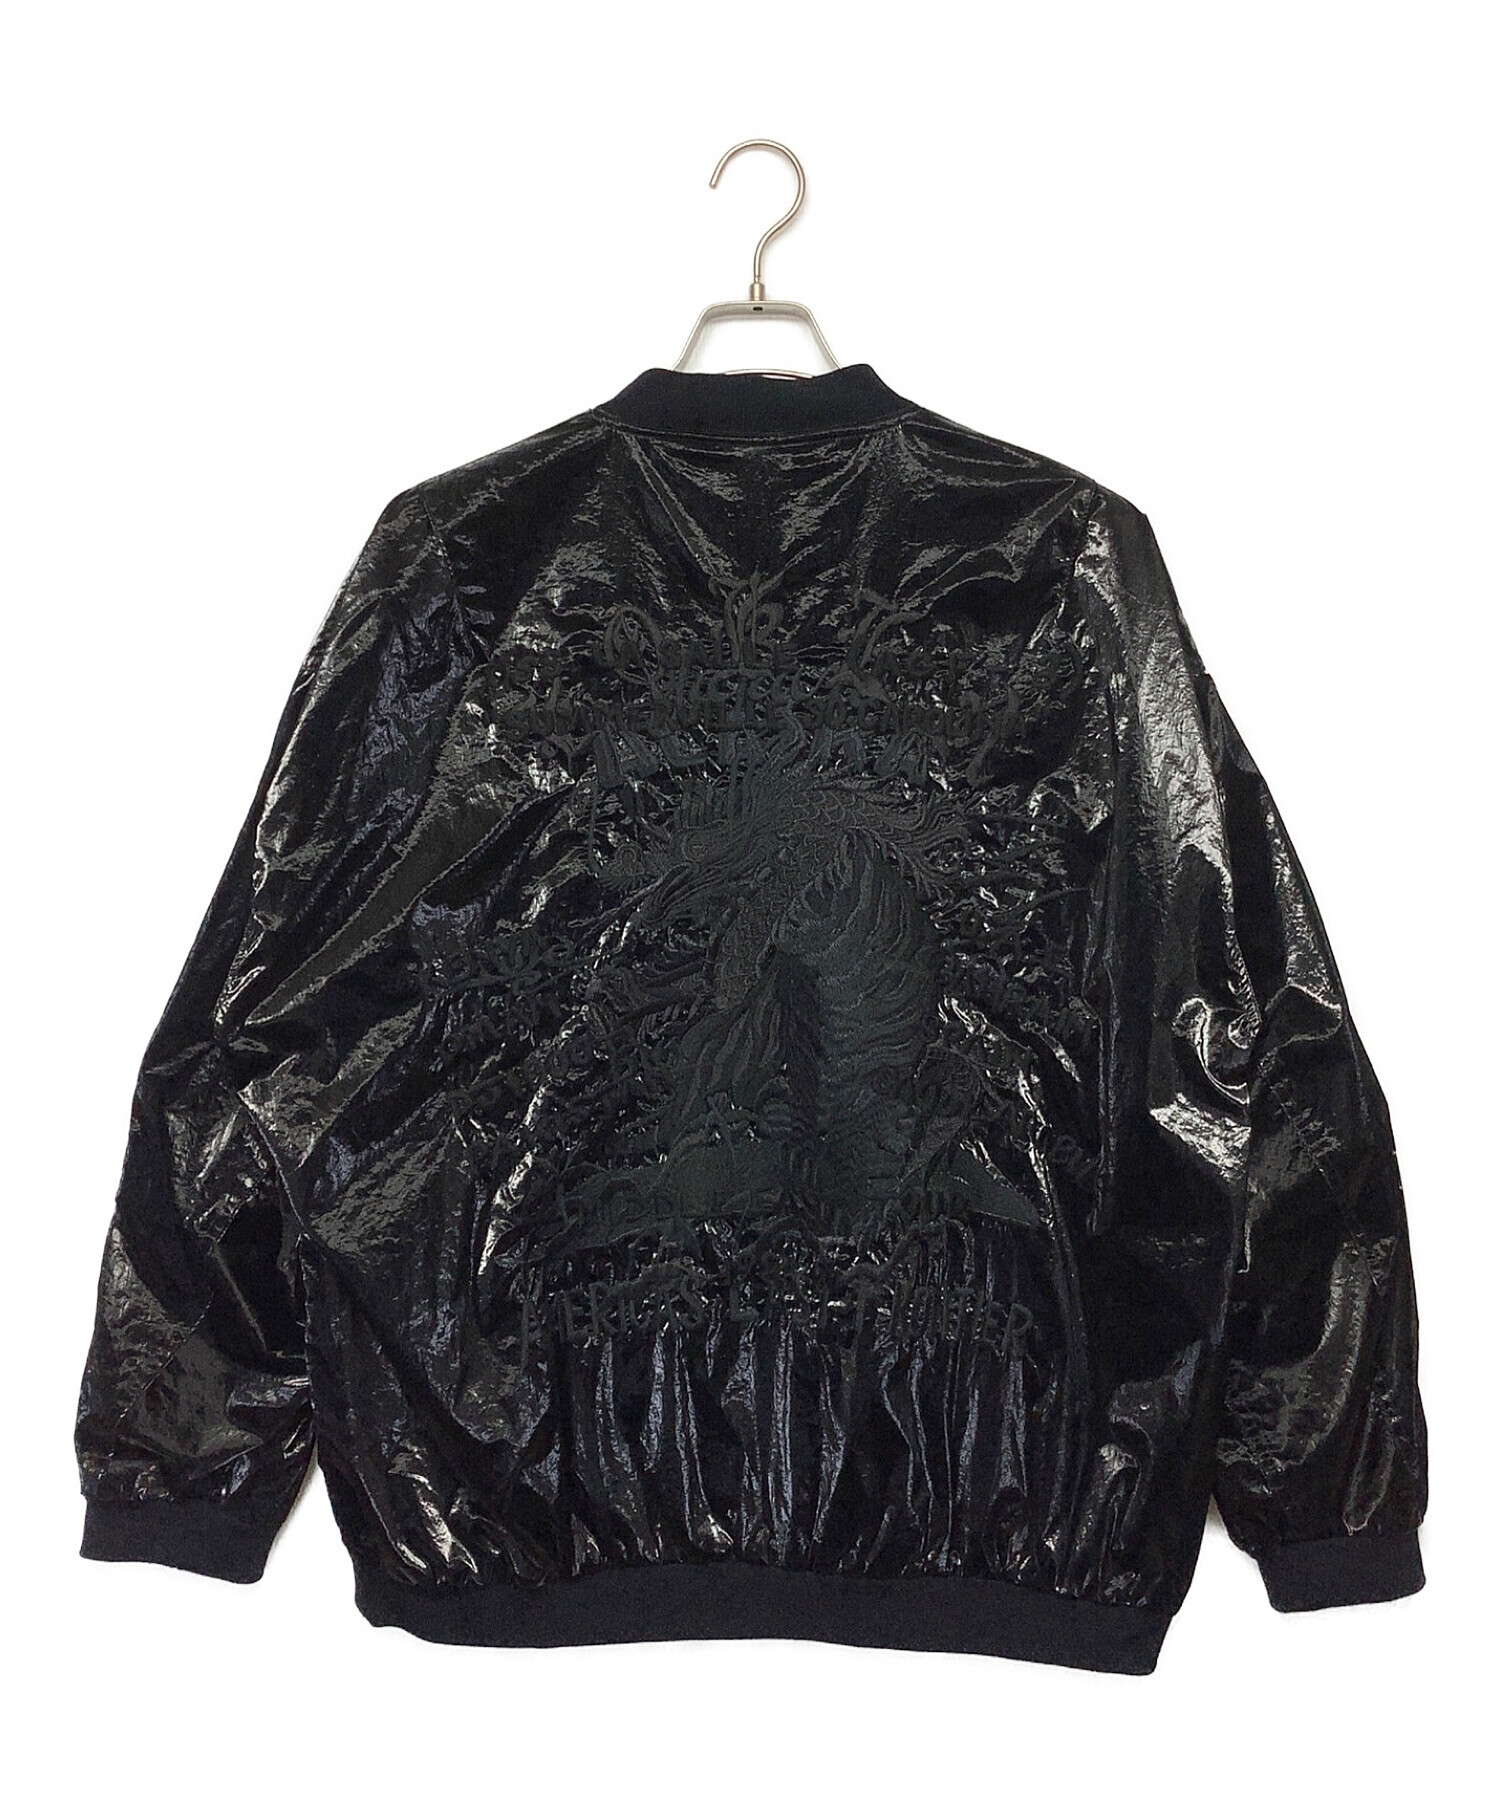 Doublet CHAOS EMBROIDERY BLOUSON - スカジャン